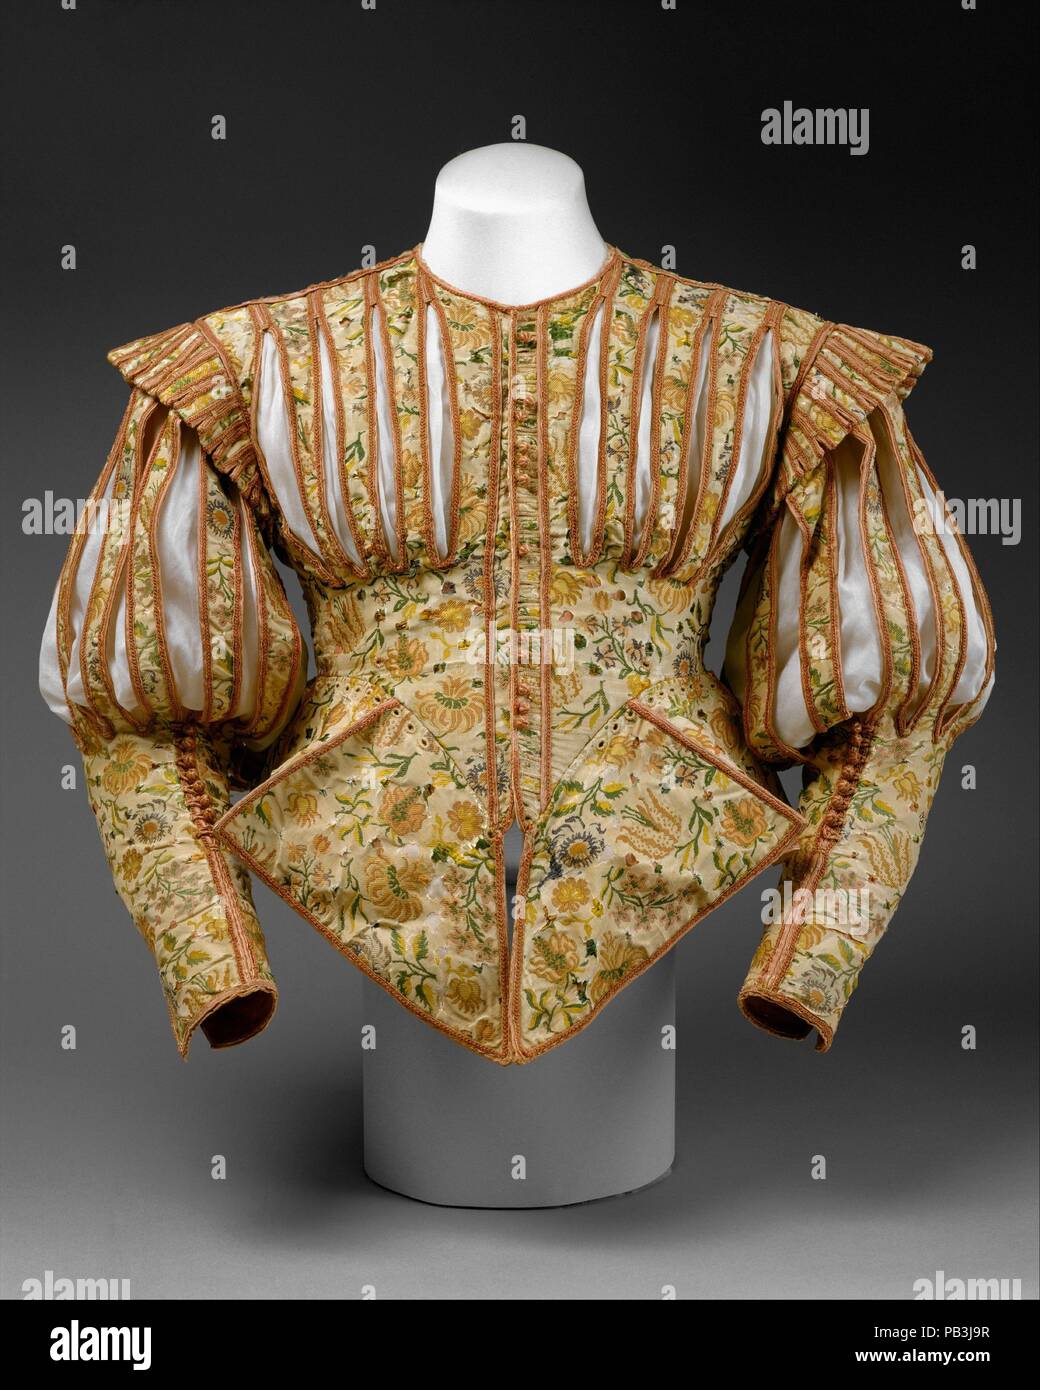 Doublet. Culture: French. Date: early 1620s.  This extraordinary doublet is one of only two surviving examples of its type from the 1620s. The only other known doublet of this kind is in the collection of the Victoria and Albert Museum in London. Made of luxurious silk embellished with pinking and decorative slits, this doublet followed a fashion that existed barely five years. Pinking, or the intentional slashing of fabric, was a popular decorative technique used to reveal colorful linings, shirts, and chemises. It is possible that this garment was constructed from silk previously pinked for  Stock Photo